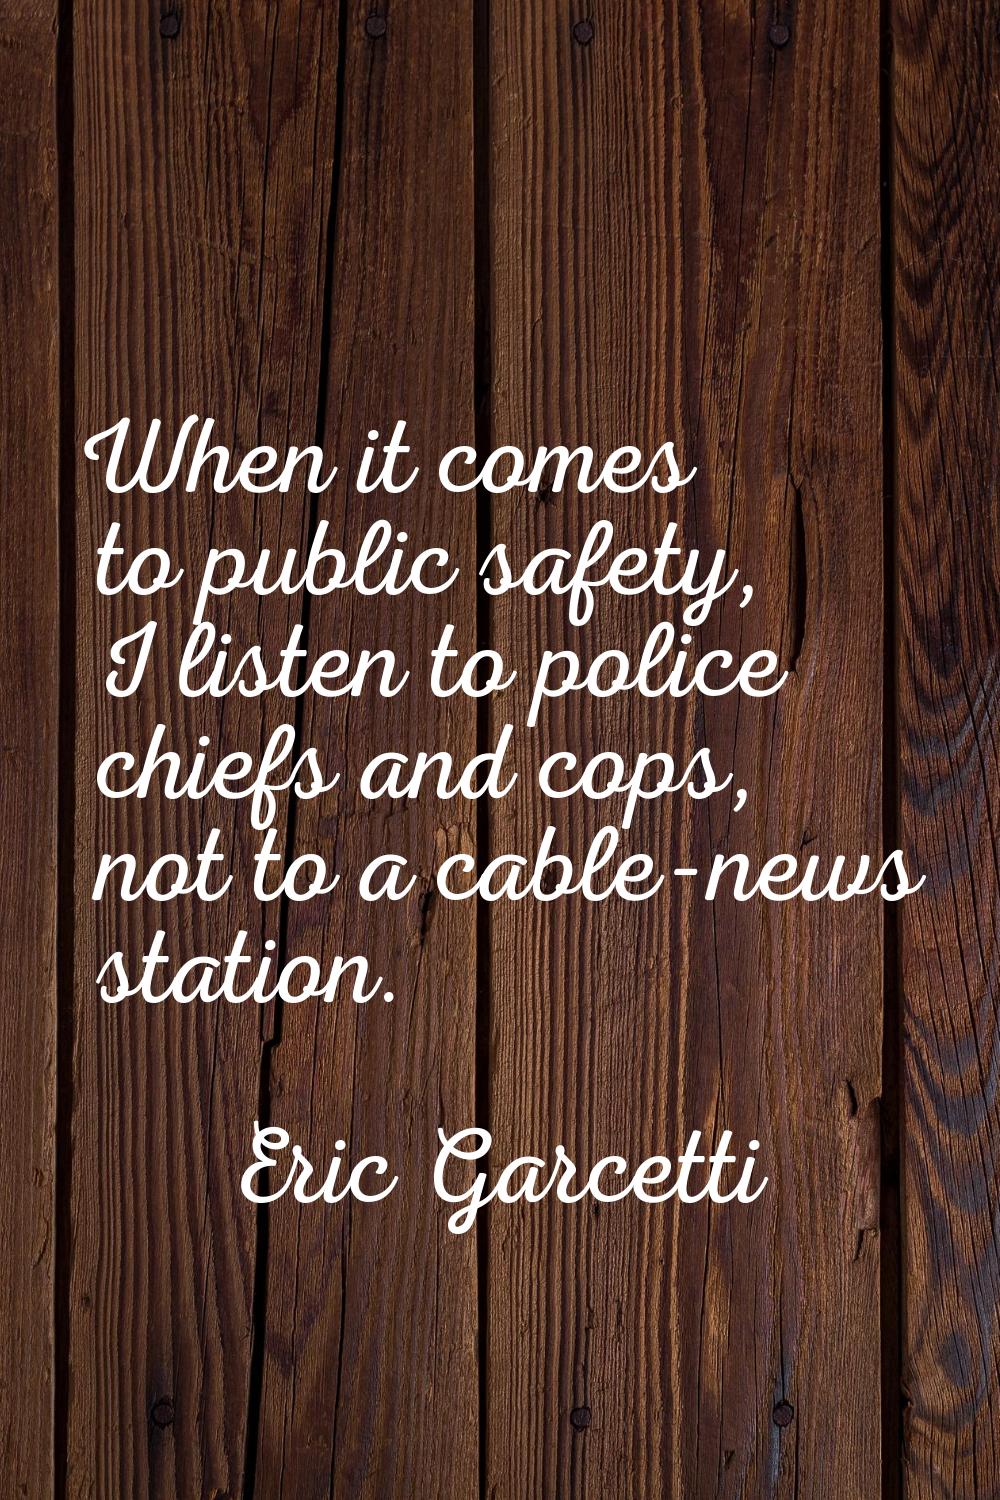 When it comes to public safety, I listen to police chiefs and cops, not to a cable-news station.